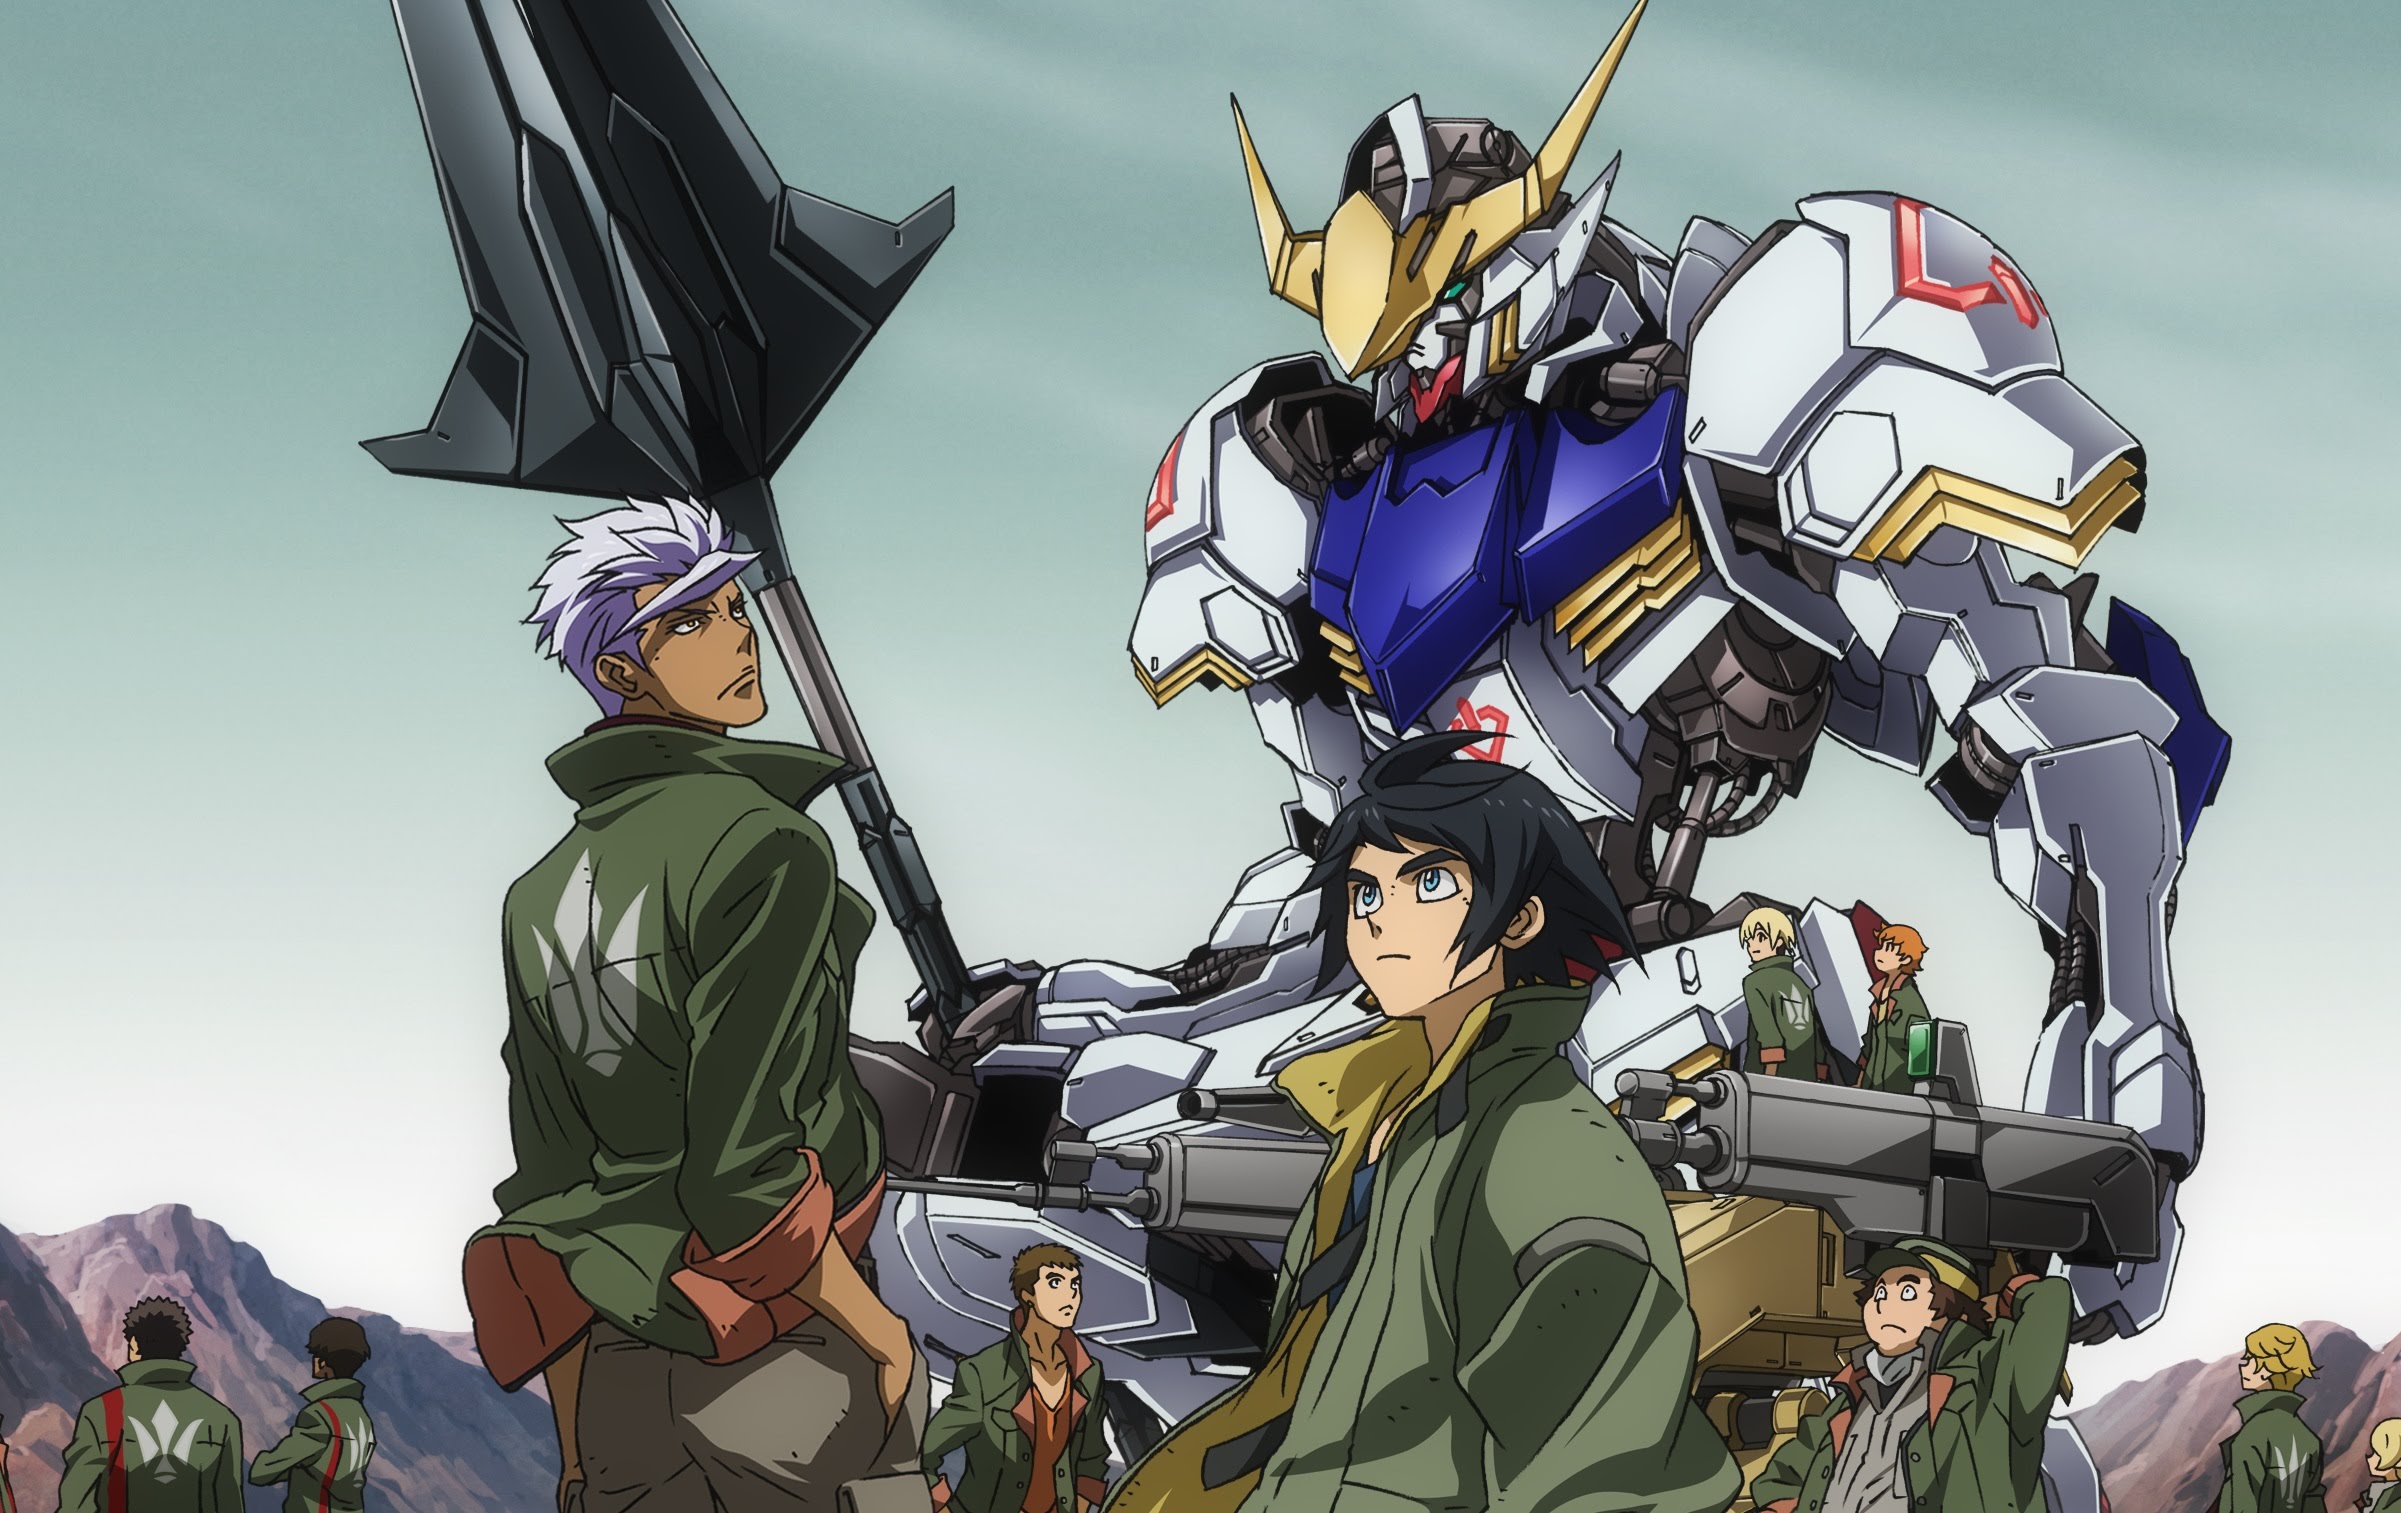 Anime Review 174 Mobile Suit Gundam Iron Blooded Orphans – TakaCode Reviews